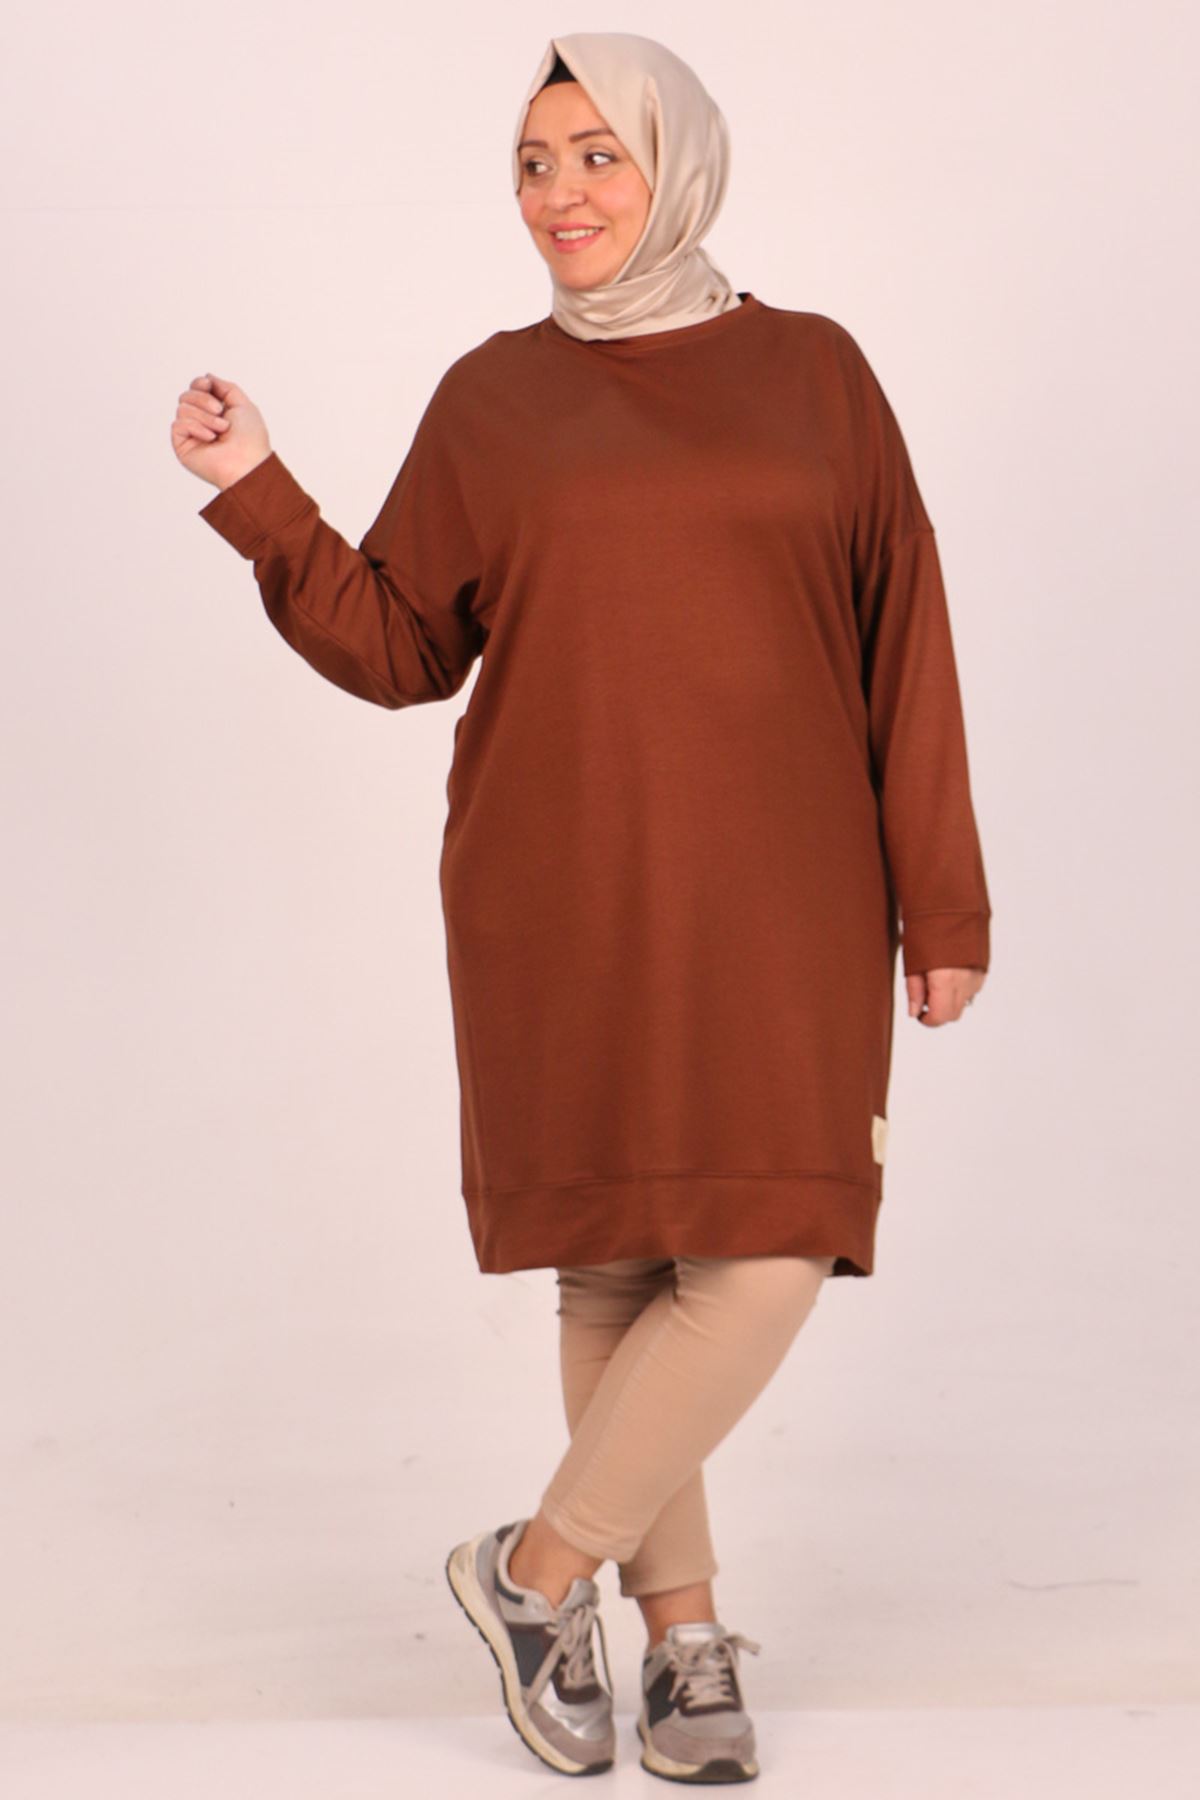 48010 Large Size Embroidered Crystal Two Thread Tunic-Brown